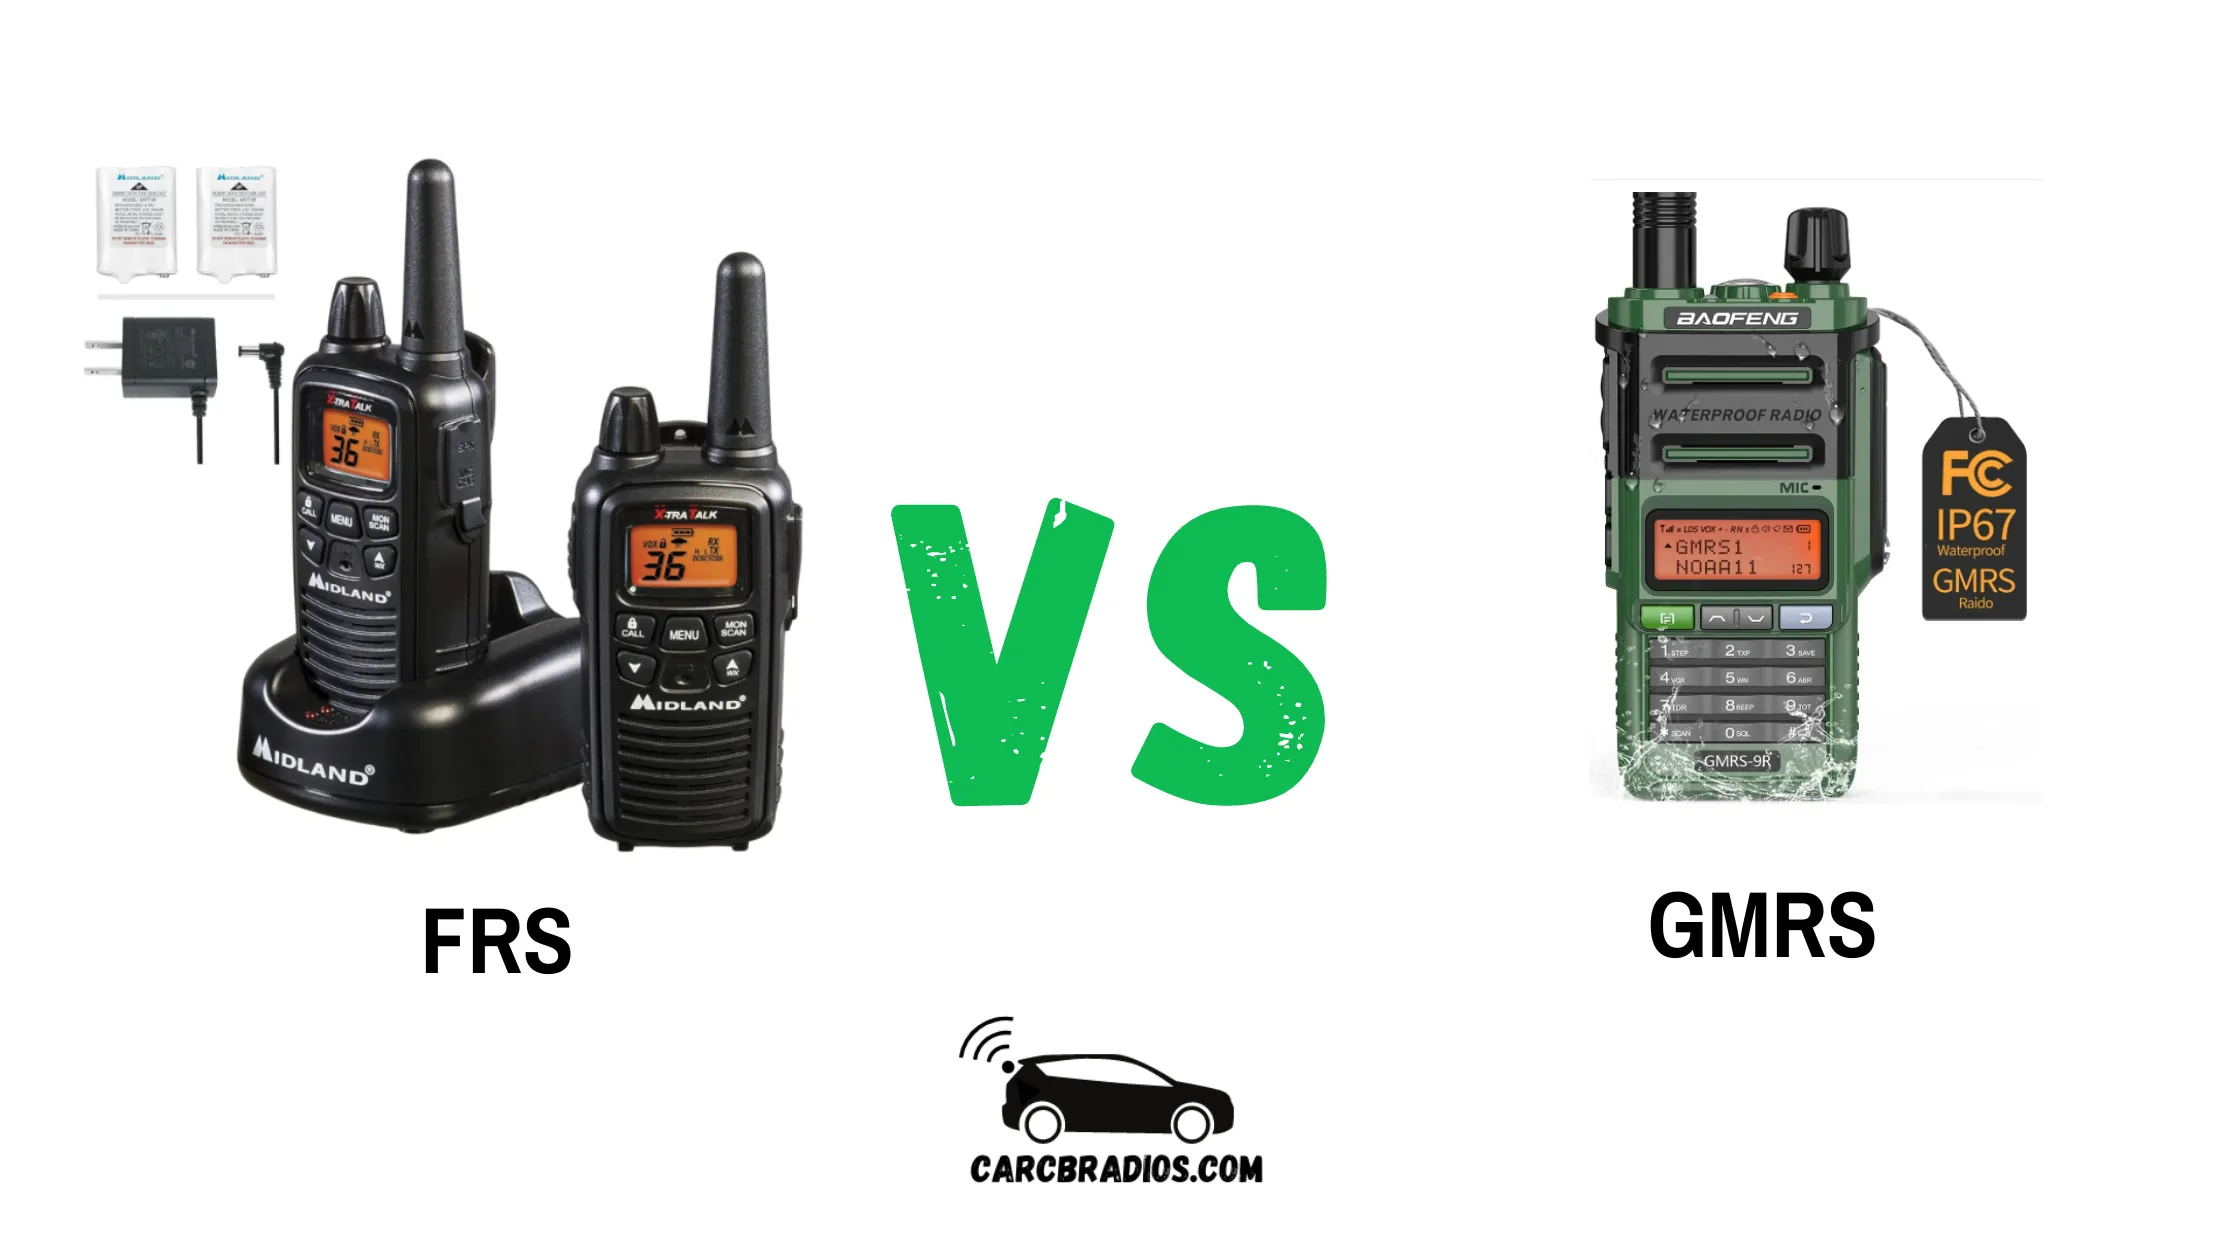 FRS and GMRS are two types of walkie-talkies that are commonly used for communication in outdoor activities, such as camping, hiking, and hunting. These devices are easy to use and do not require any special training or license to operate, making them a popular choice among outdoor enthusiasts.